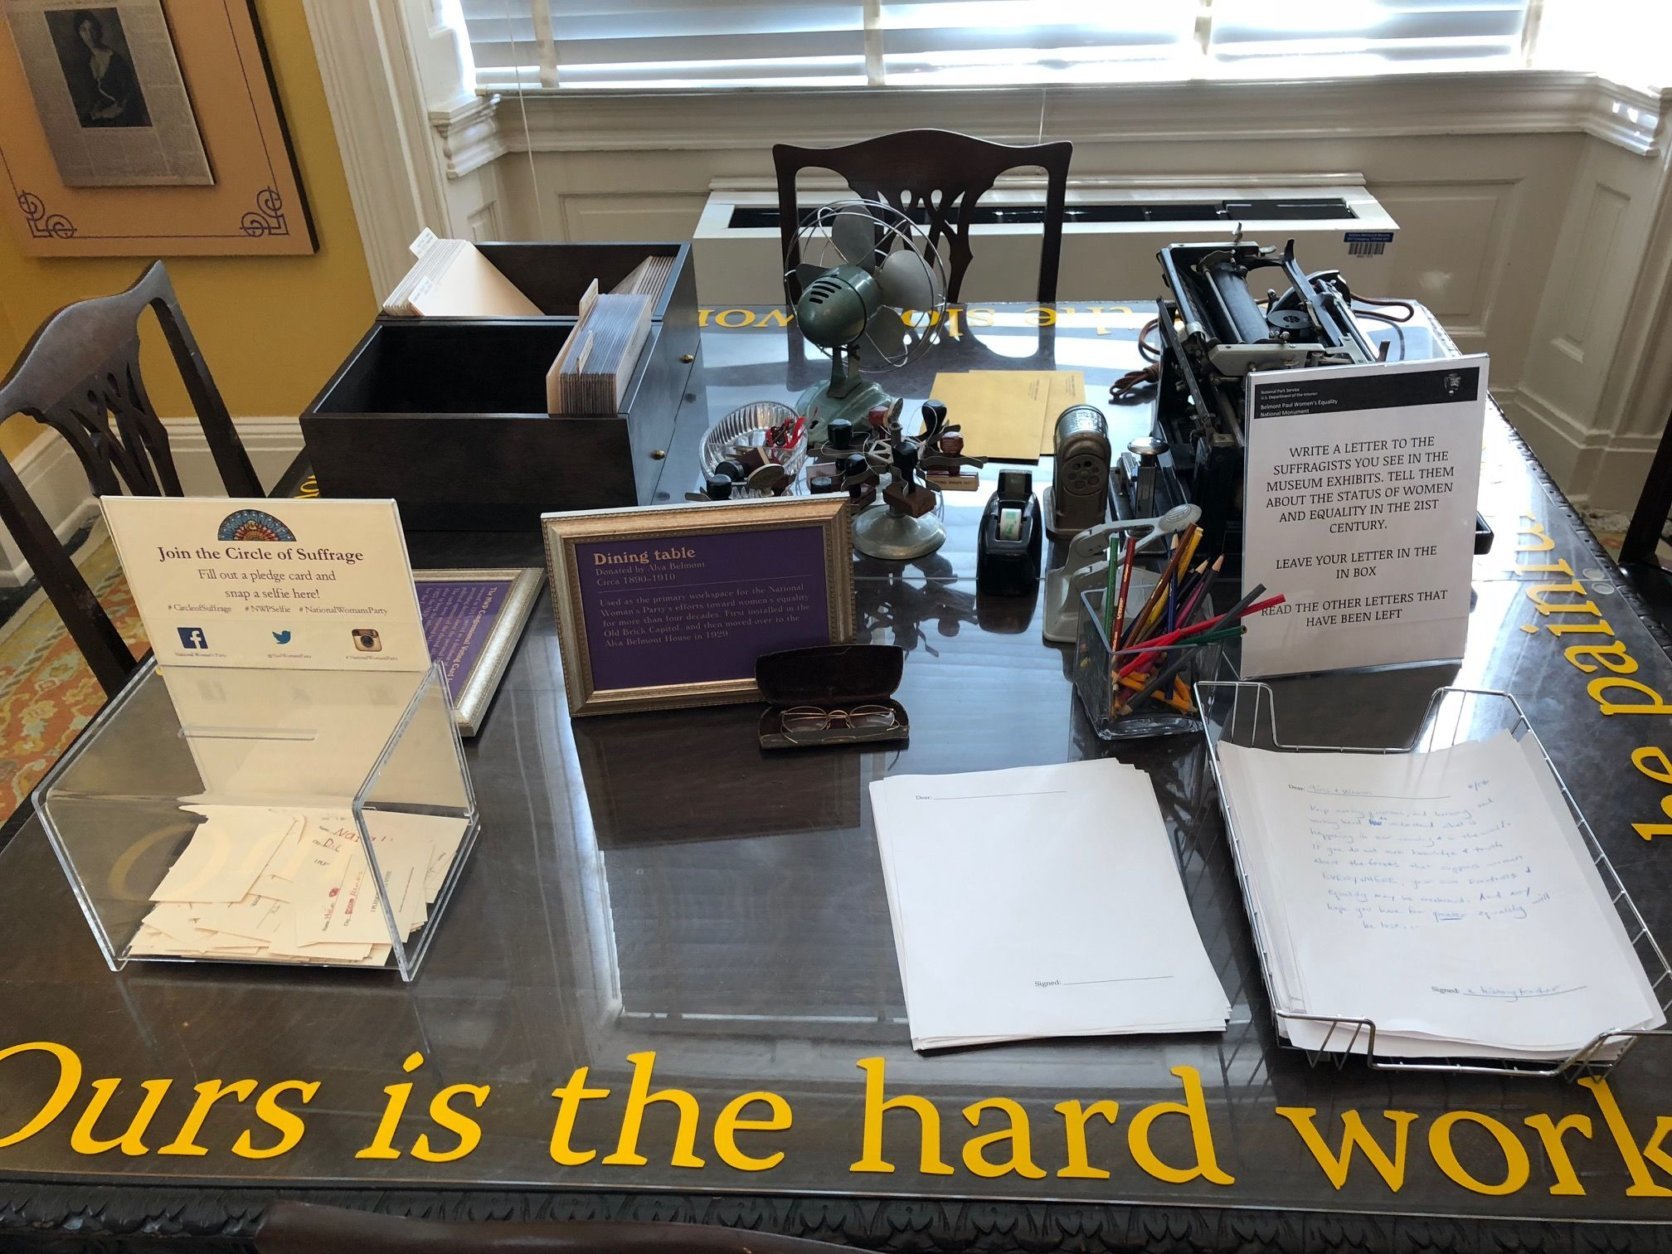 Visitors can leave letters for the suffragists on the very desk where the women did most of their work at the headquarters of the National Women’s Party.